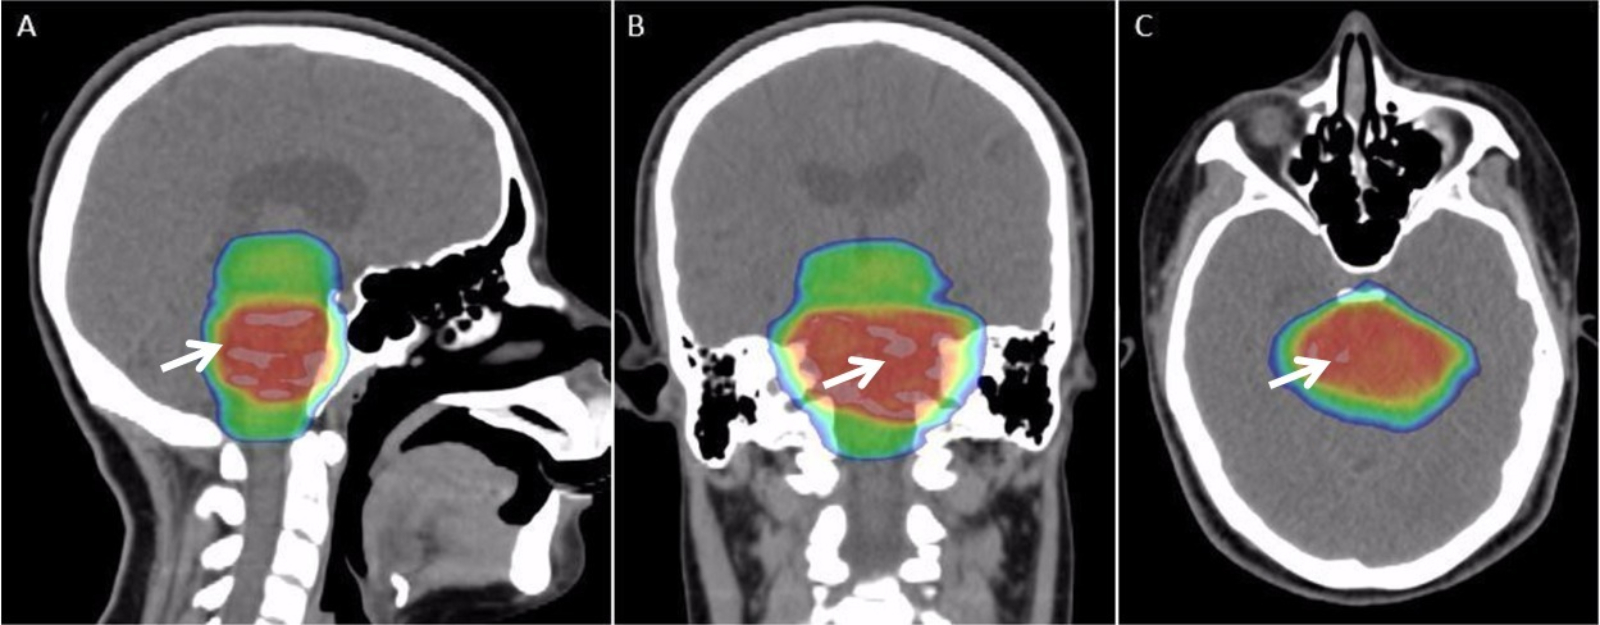 Palliative Care Options for a Young Adult Patient with a Diffuse Intrinsic Pontine Glioma - Fig. 3.png